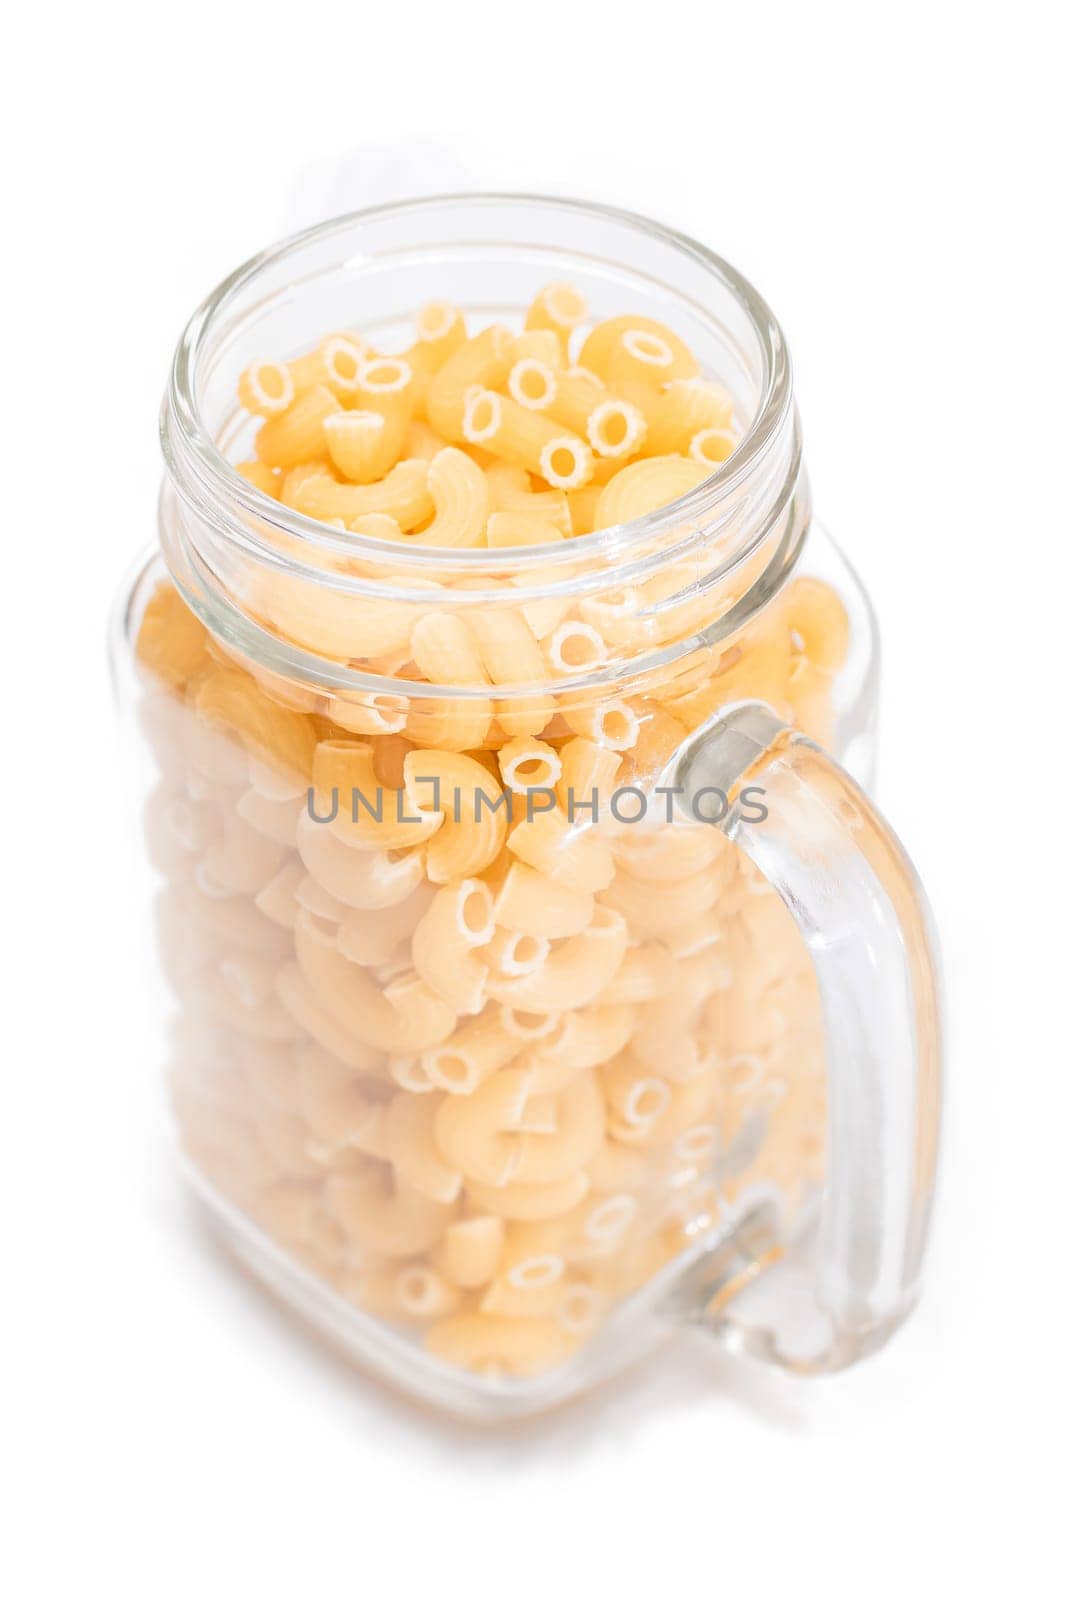 Uncooked Chifferi Rigati Pasta in Glass Jar Isolated on White Background. Fat and Unhealthy Food. Classic Dry Macaroni. Italian Culture and Cuisine. Raw Pasta - Isolation